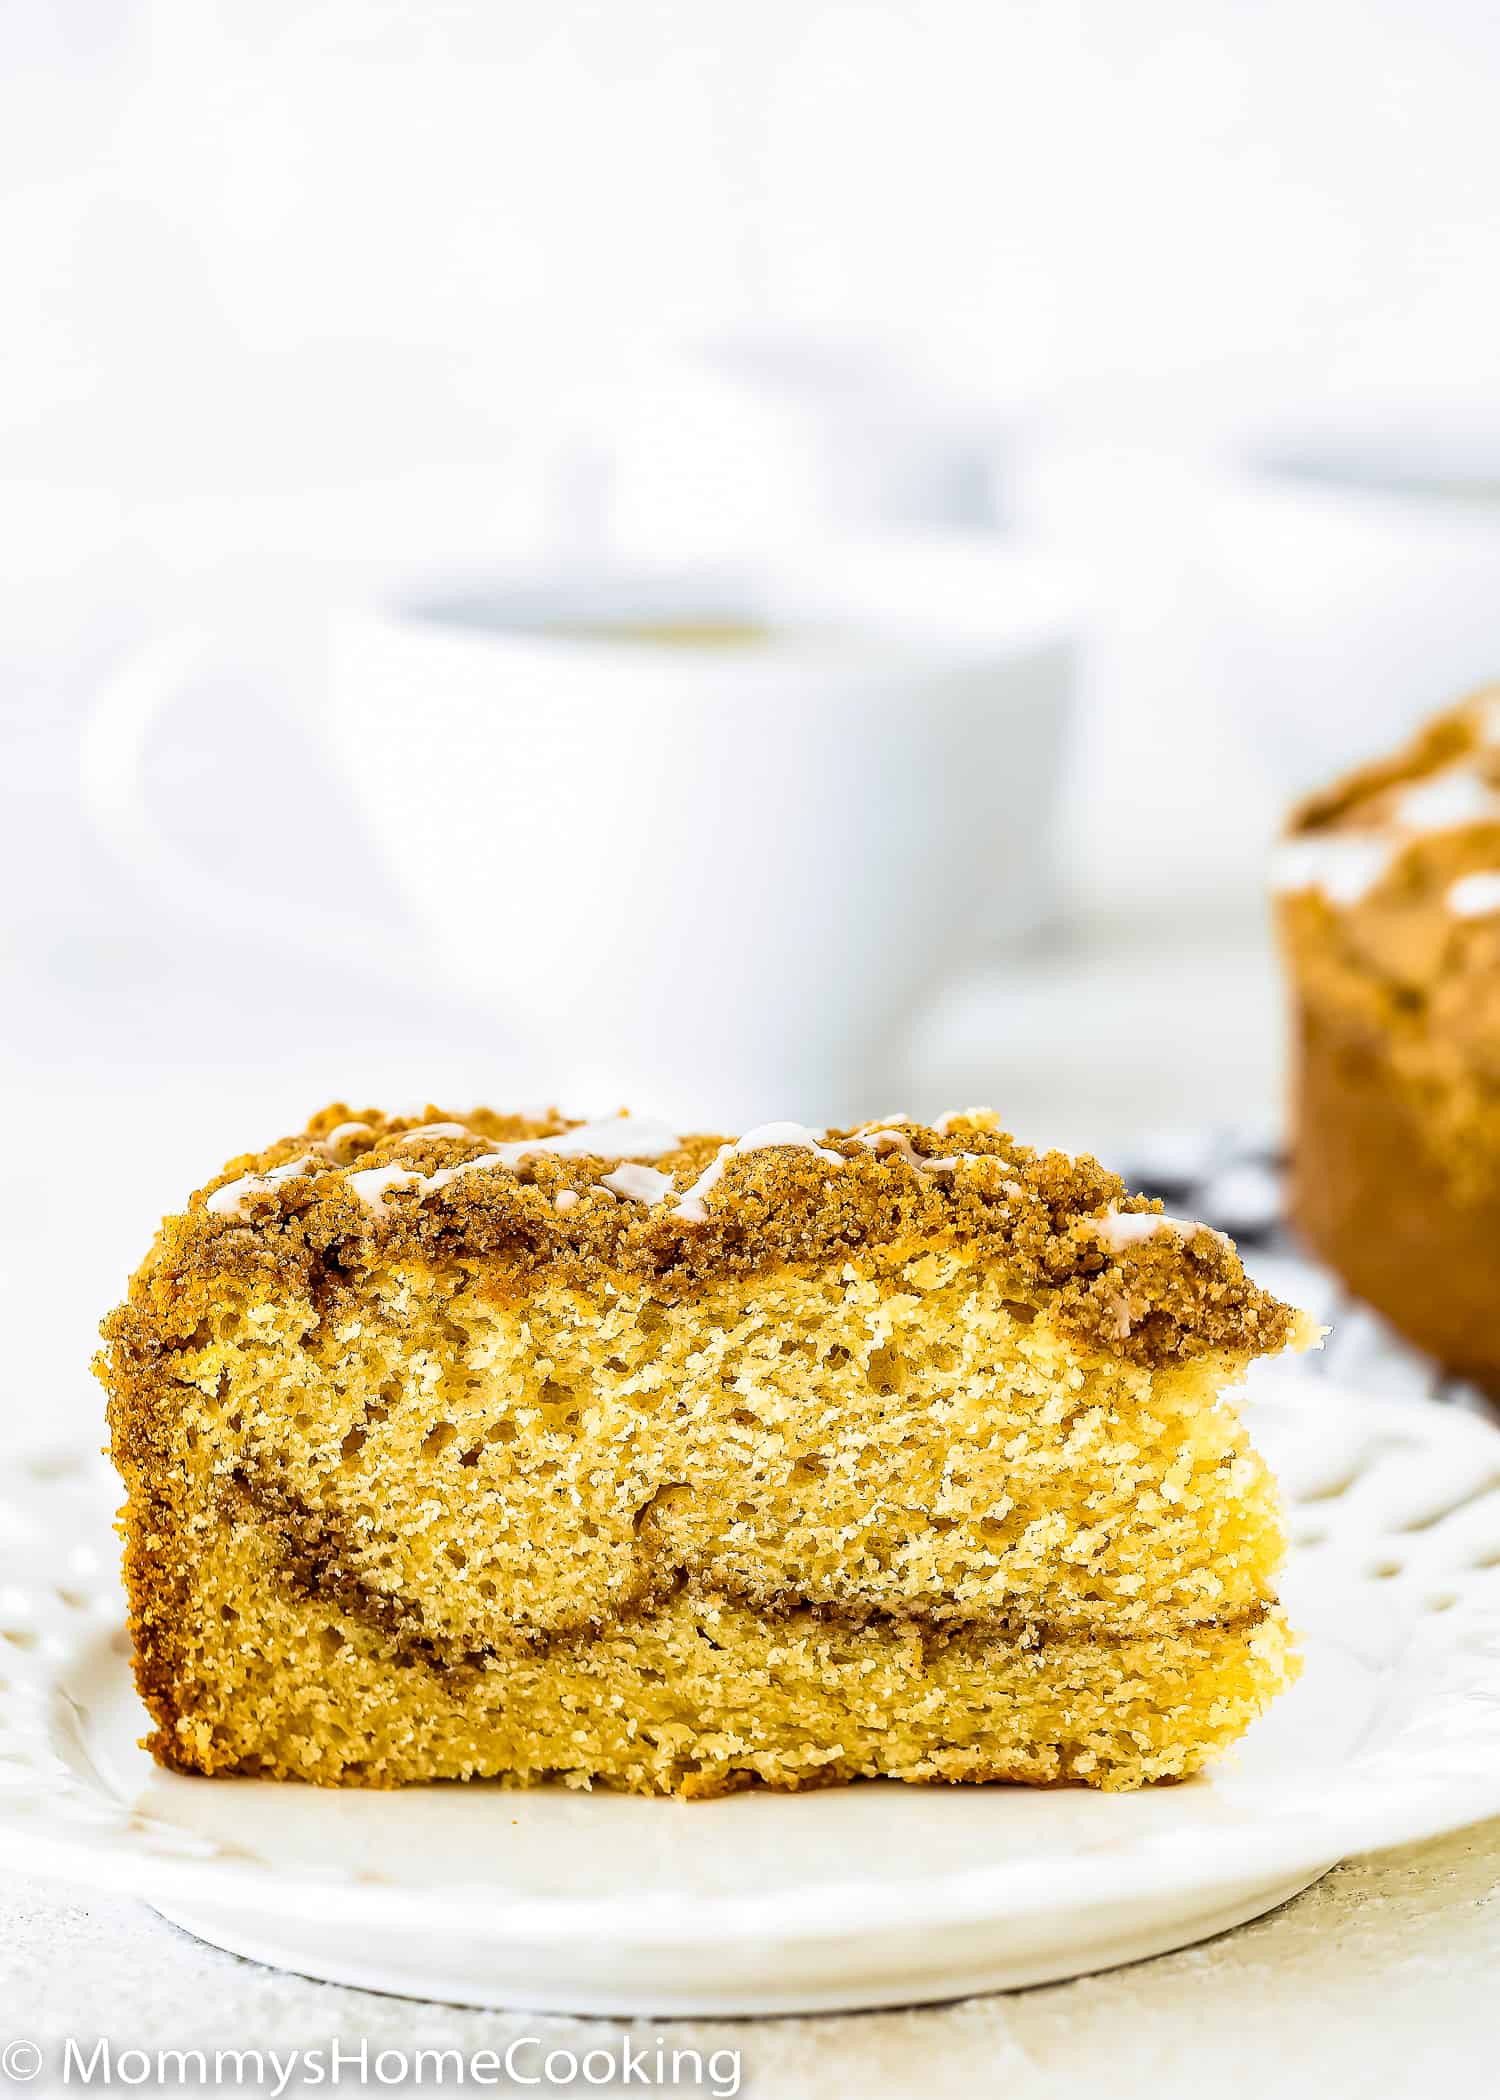 A slice of Eggless Coffee Cake on a plate with a cup of coffee in the background.